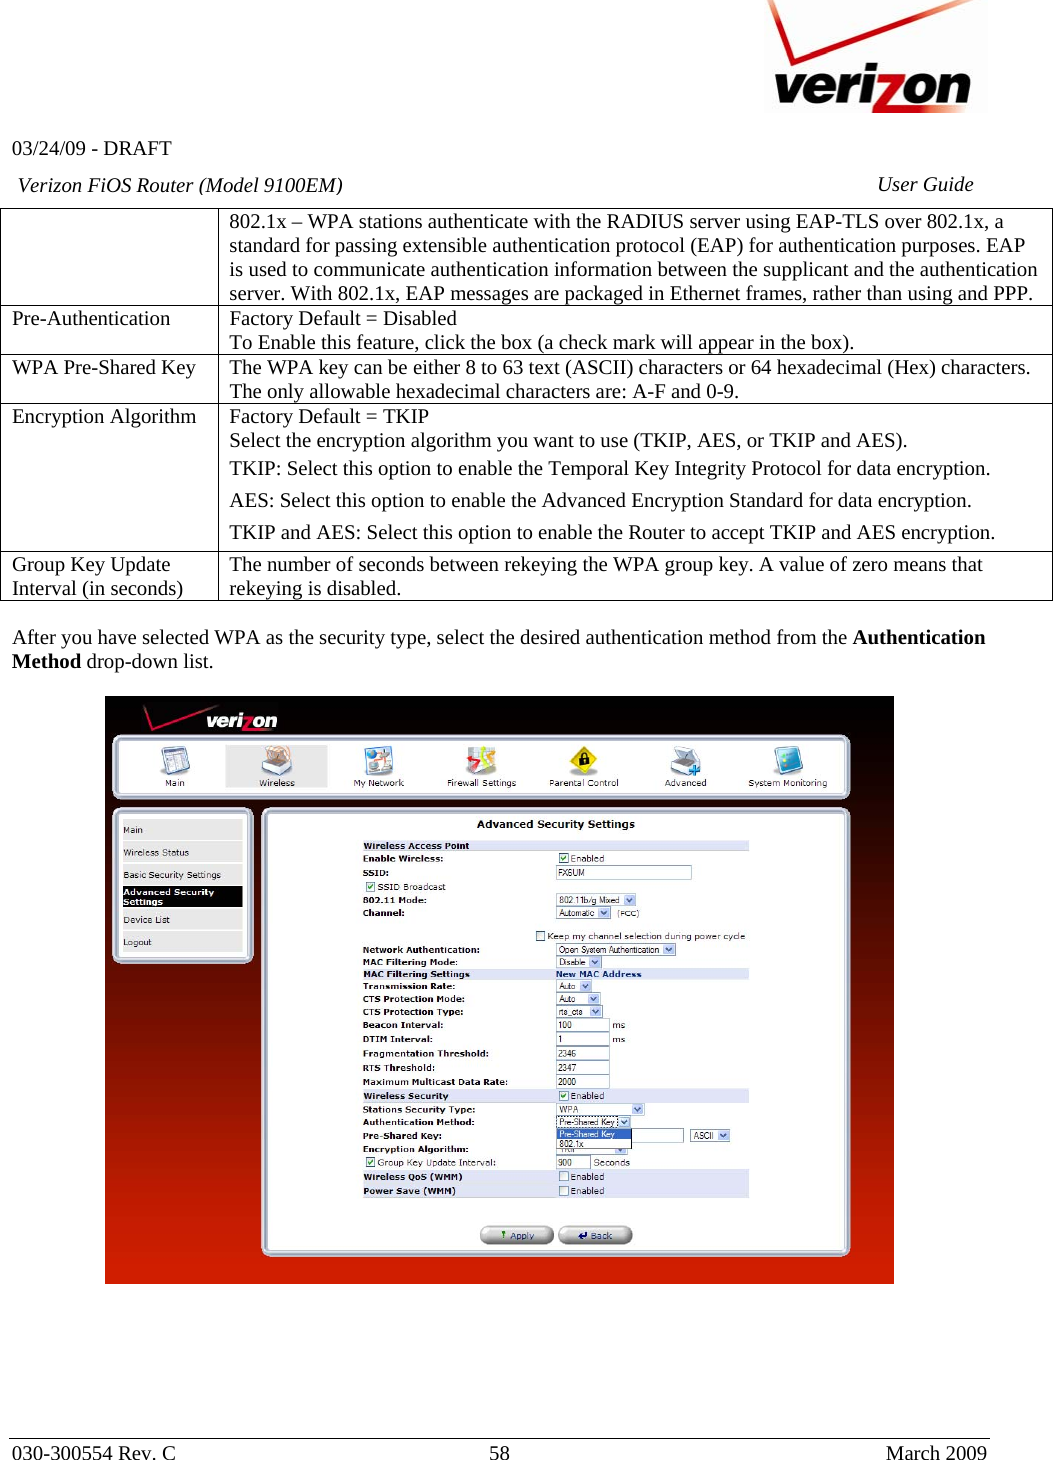   03/24/09 - DRAFT   030-300554 Rev. C  58      March 2009  Verizon FiOS Router (Model 9100EM) User Guide802.1x – WPA stations authenticate with the RADIUS server using EAP-TLS over 802.1x, a standard for passing extensible authentication protocol (EAP) for authentication purposes. EAP is used to communicate authentication information between the supplicant and the authentication server. With 802.1x, EAP messages are packaged in Ethernet frames, rather than using and PPP. Pre-Authentication  Factory Default = Disabled To Enable this feature, click the box (a check mark will appear in the box).  WPA Pre-Shared Key  The WPA key can be either 8 to 63 text (ASCII) characters or 64 hexadecimal (Hex) characters. The only allowable hexadecimal characters are: A-F and 0-9. Encryption Algorithm  Factory Default = TKIP Select the encryption algorithm you want to use (TKIP, AES, or TKIP and AES). TKIP: Select this option to enable the Temporal Key Integrity Protocol for data encryption. AES: Select this option to enable the Advanced Encryption Standard for data encryption. TKIP and AES: Select this option to enable the Router to accept TKIP and AES encryption. Group Key Update Interval (in seconds)  The number of seconds between rekeying the WPA group key. A value of zero means that rekeying is disabled.  After you have selected WPA as the security type, select the desired authentication method from the Authentication Method drop-down list.         